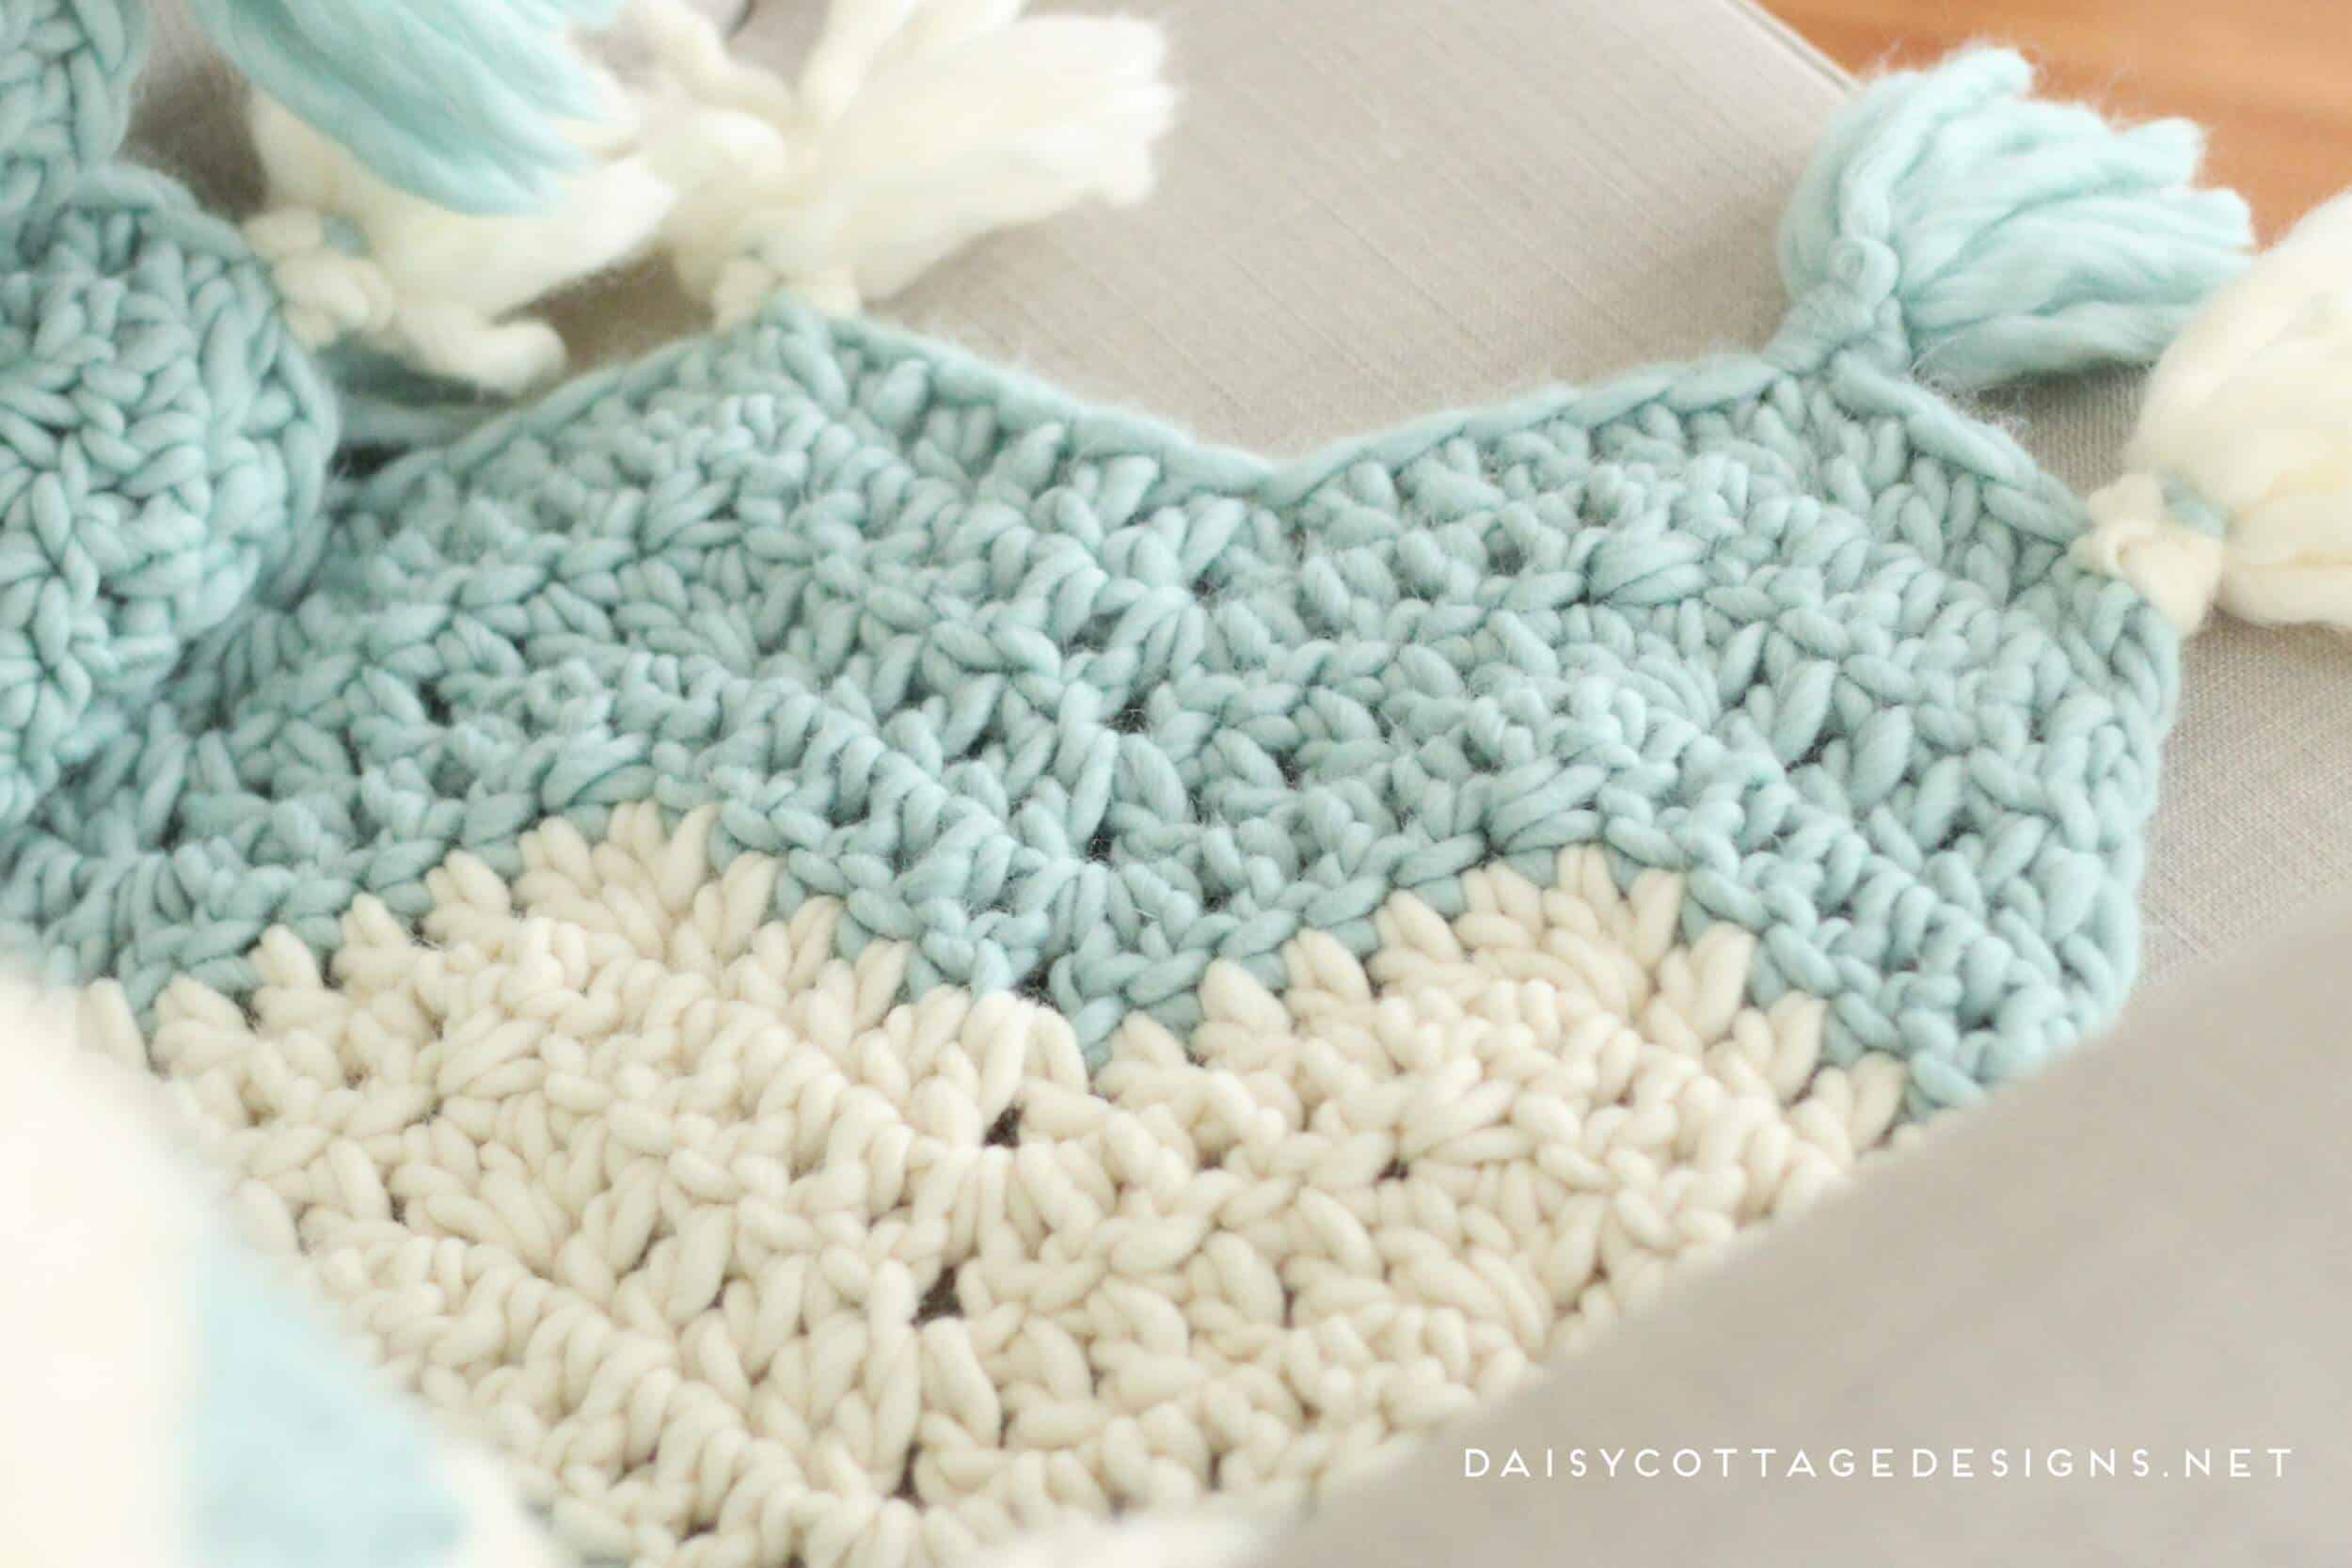 Chunky Chevron Crochet Blanket with Tassels. Beautiful and easy to make. Get a discount on this beautiful Yarn, too! | chunky chevron blanket, quick crochet blanket, bulky yarn patterns, Daisy Cottage Designs